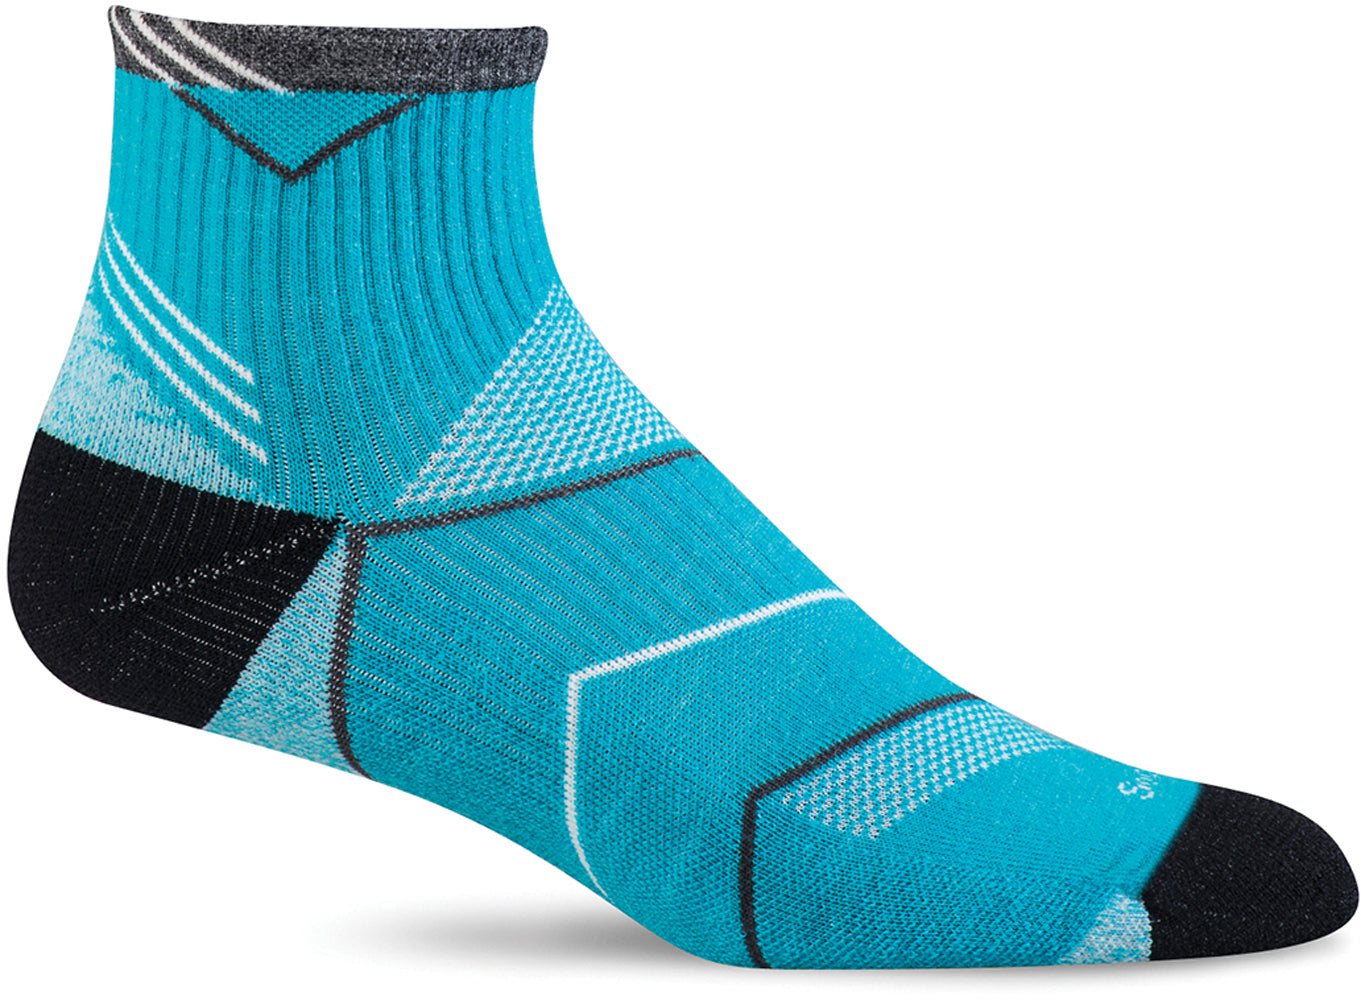 Sockwell Women's Incline Quarter Sock in Turquoise color from the side